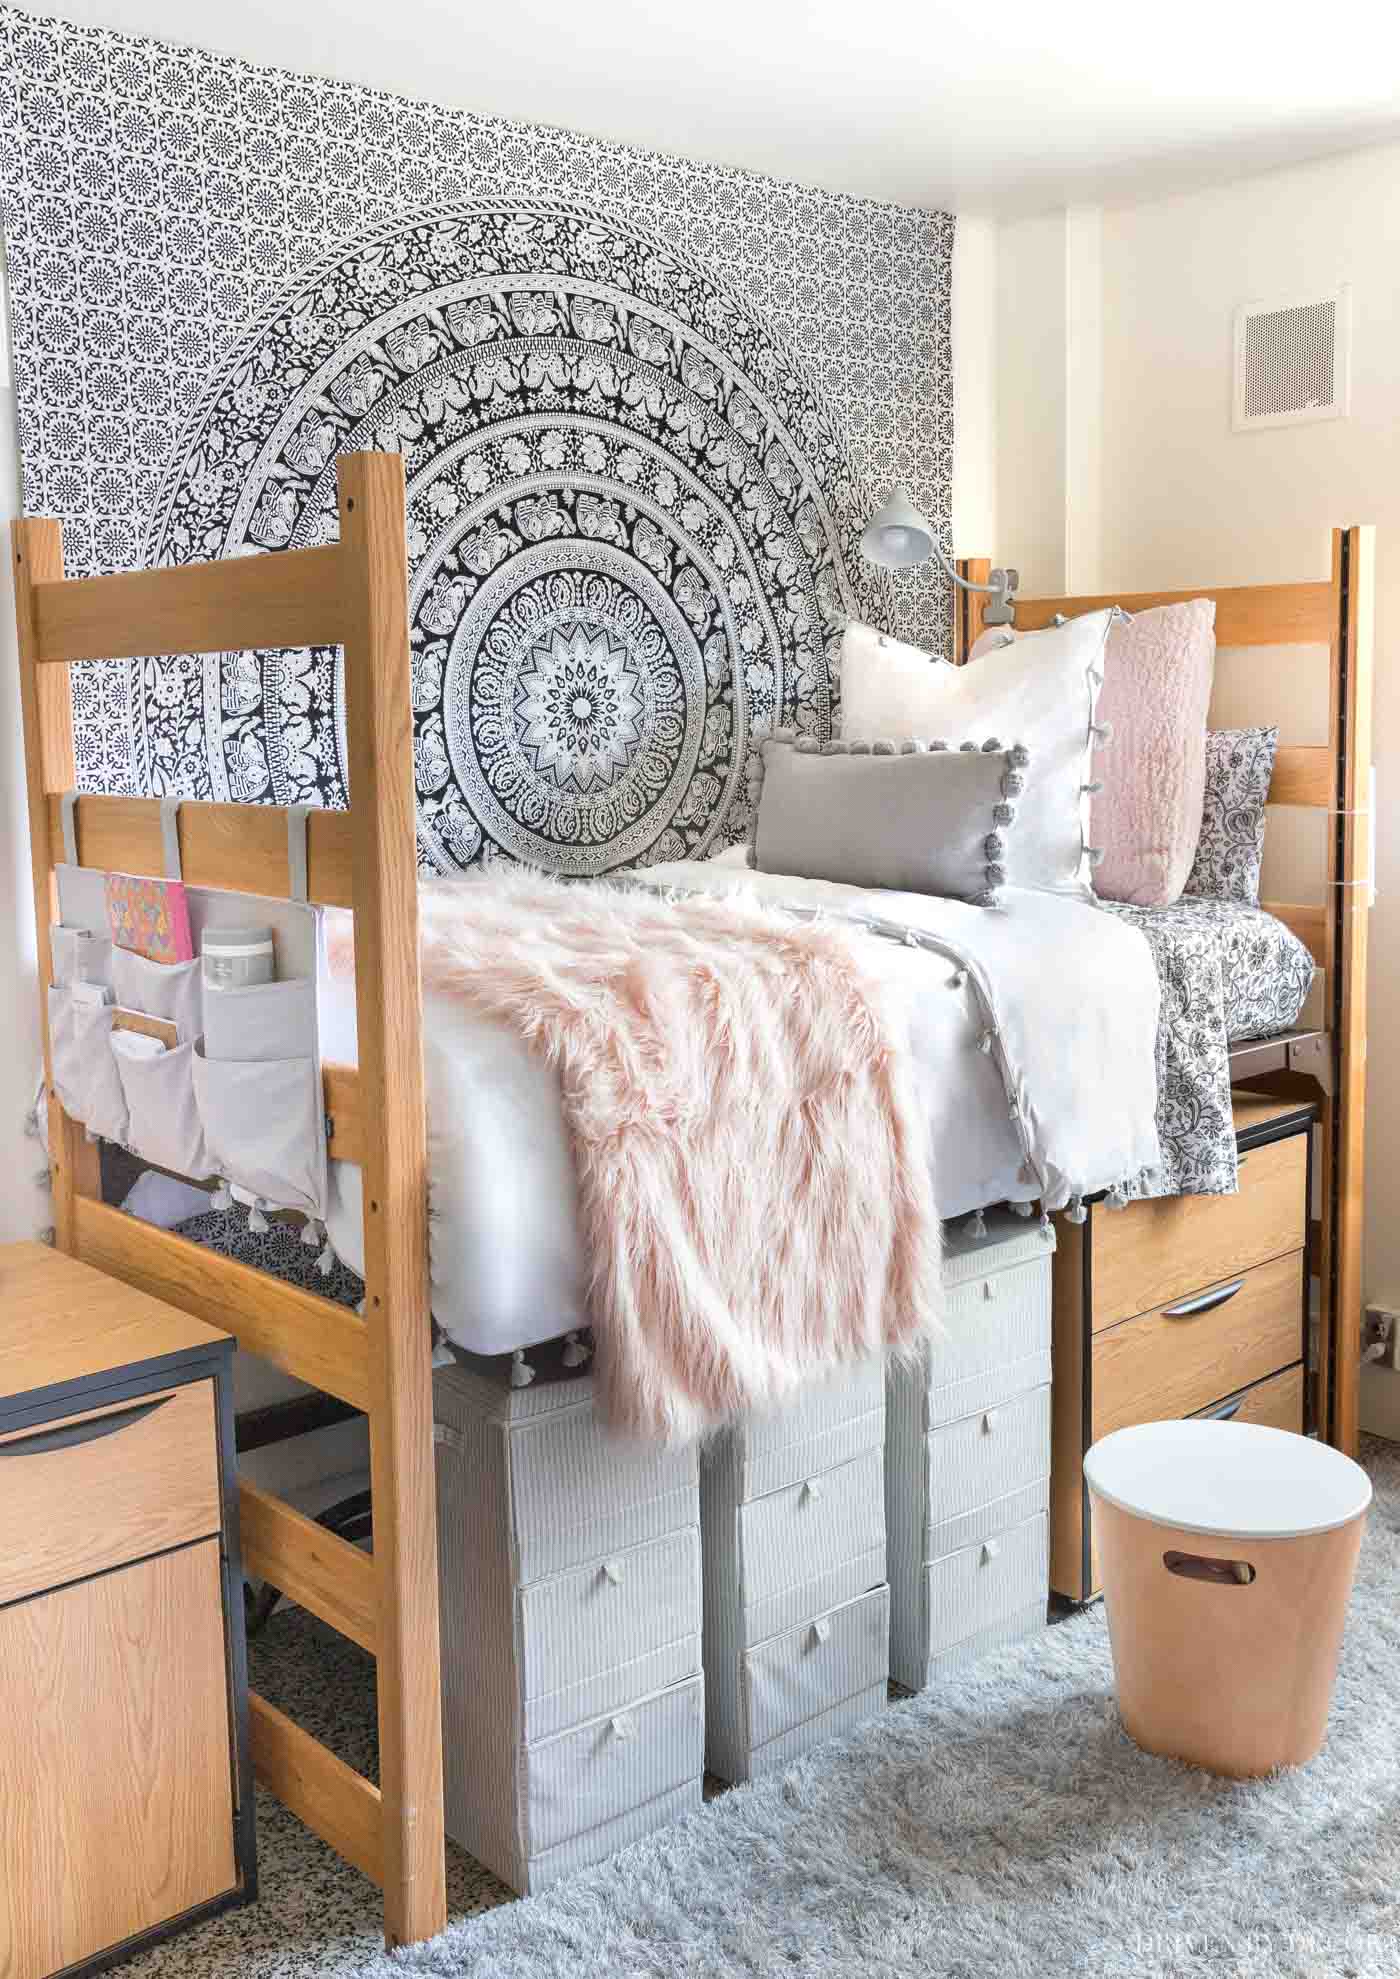 Dorm Room Ideas for Girls from Our "Before" & "After" Dorm